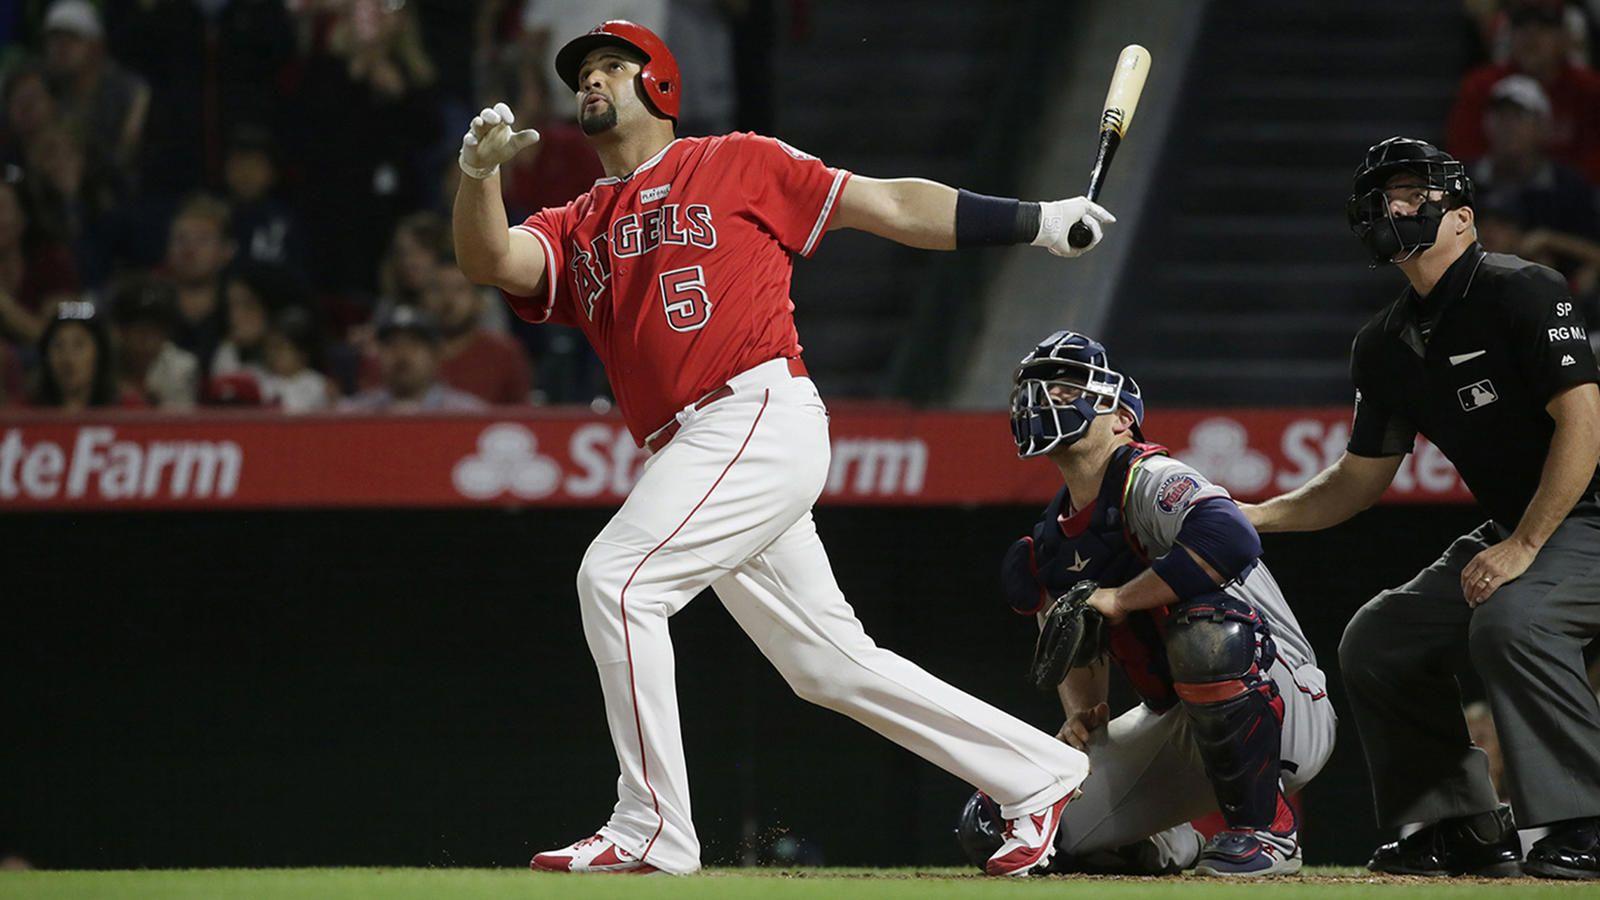 With his 600th home run, Angels slugger Albert Pujols joins a